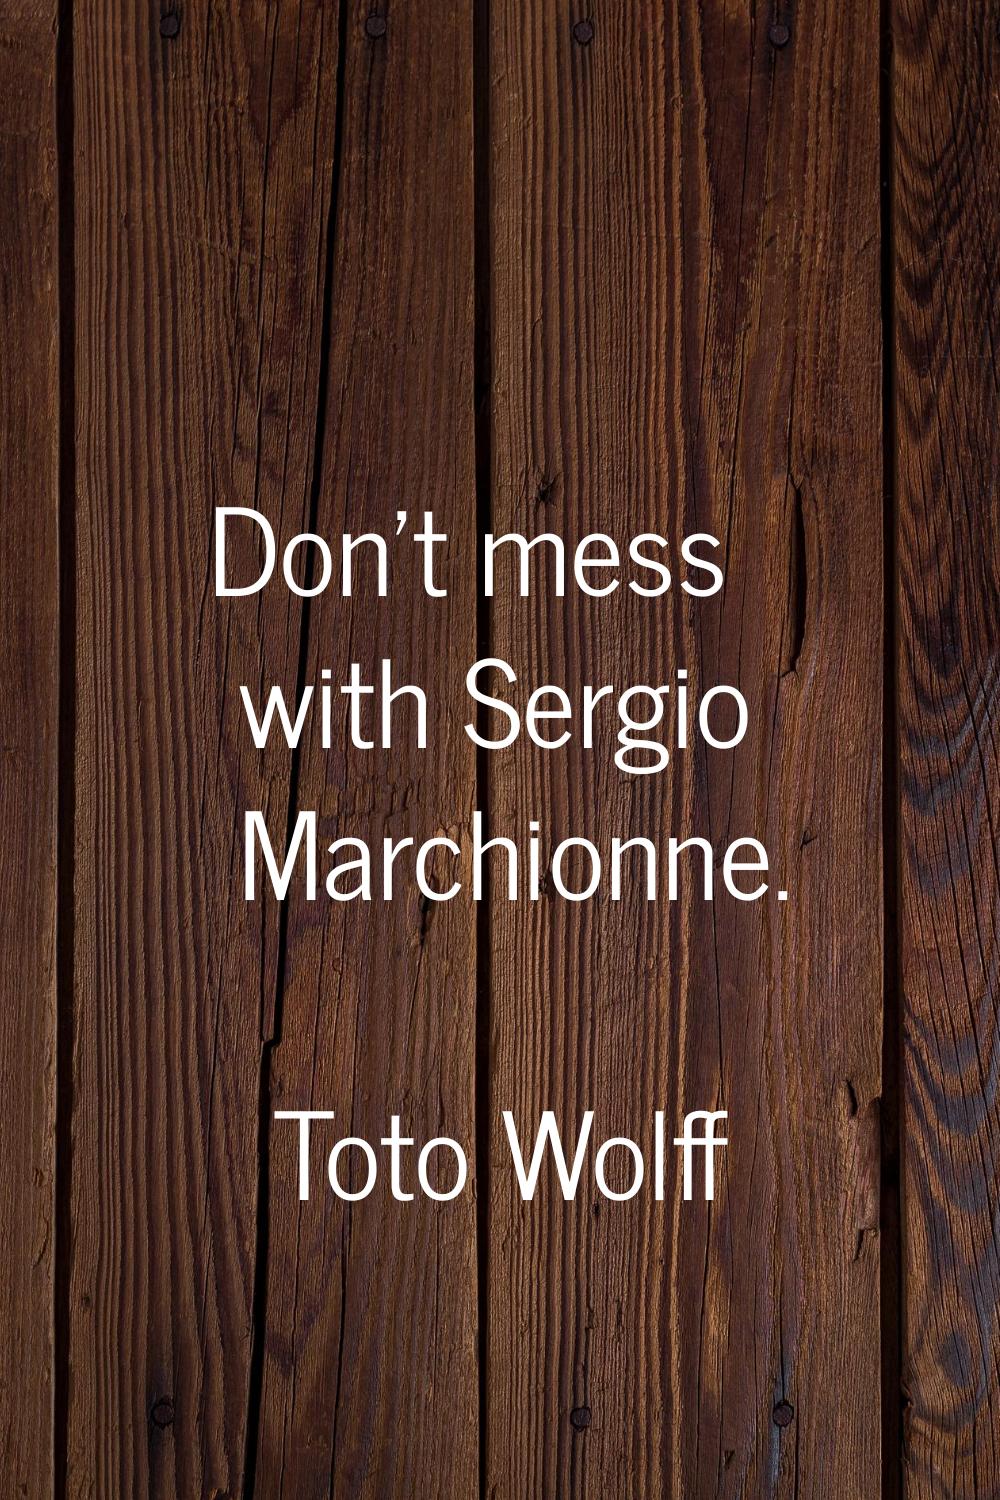 Don't mess with Sergio Marchionne.